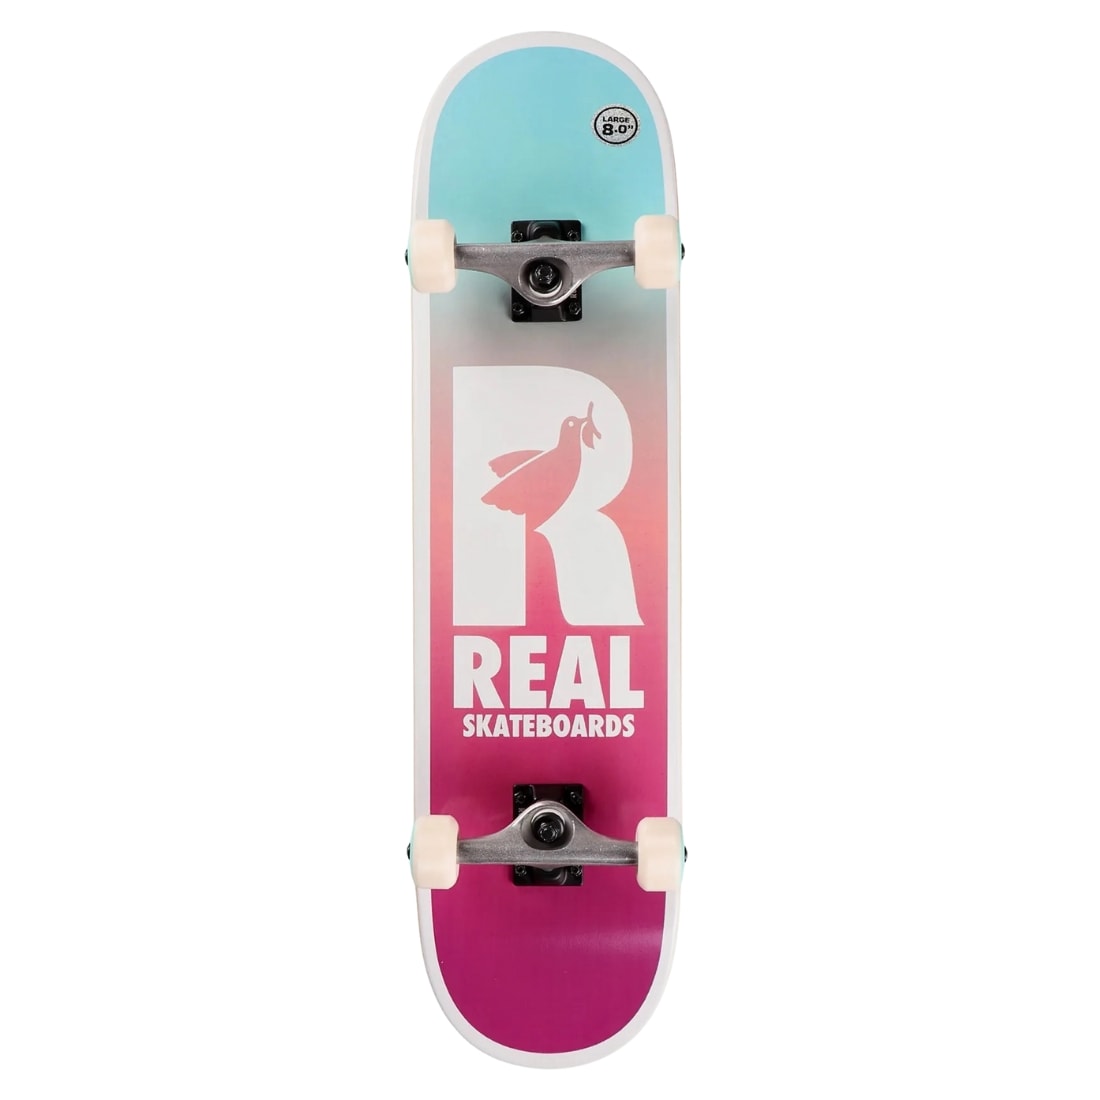 Real 8.0" Be Free Fades Complete Skateboard - Multi - Complete Skateboard by Real 8.0 inch